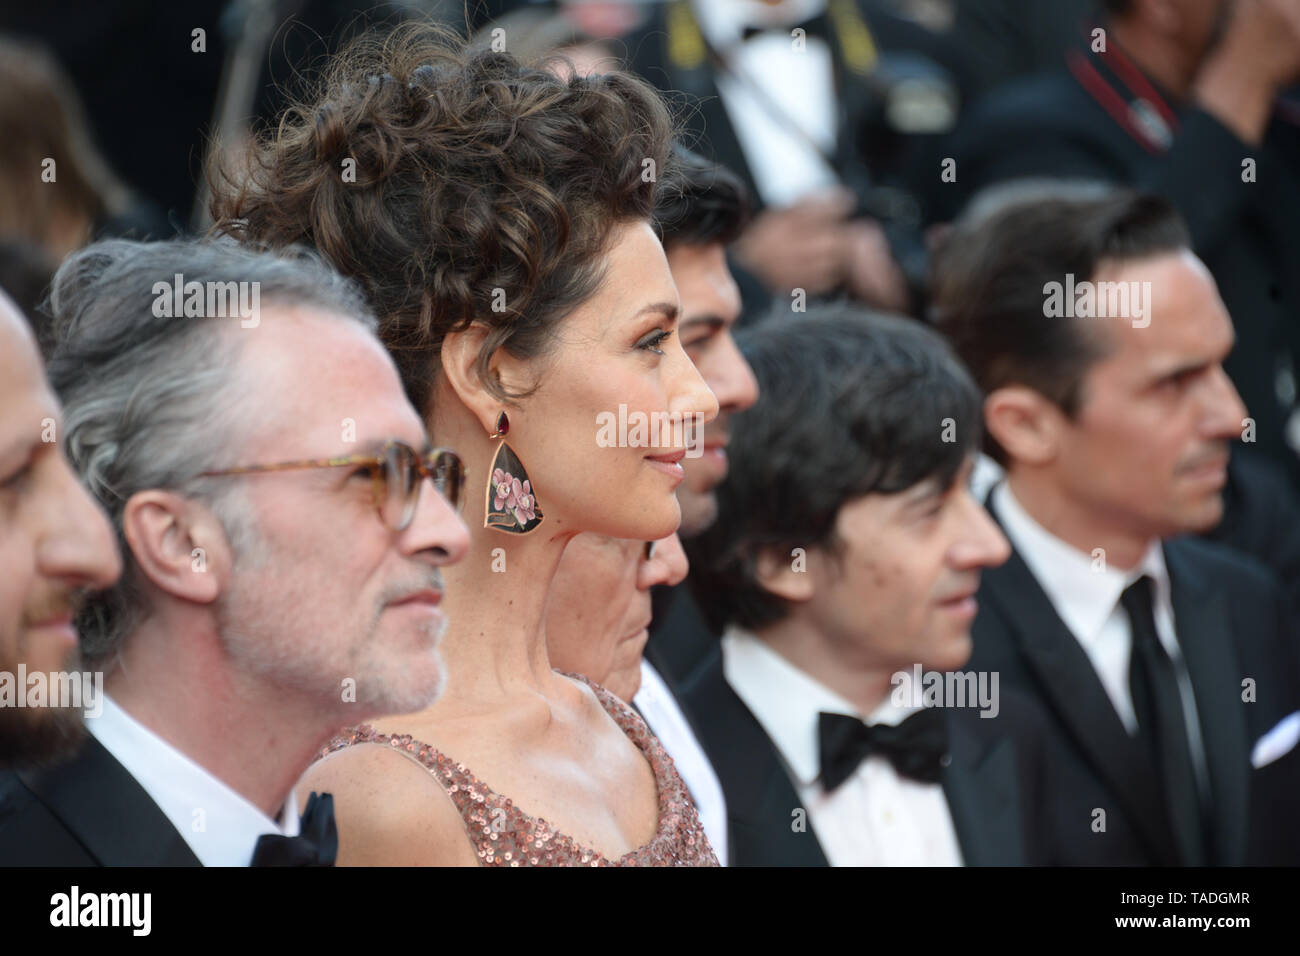 May 23, 2019 - Cannes, France - CANNES, FRANCE - MAY 23: Luigi Lo Cascio, Maria Fernanda Canido, Pierfrancesco Favino, Fausto Russo Alesi, Marco Bellocchio and the cast and crew attend the screening of ''The Traitor'' during the 72nd annual Cannes Film Festival on May 23, 2019 in Cannes, France. (Credit Image: © Frederick InjimbertZUMA Wire) Stock Photo